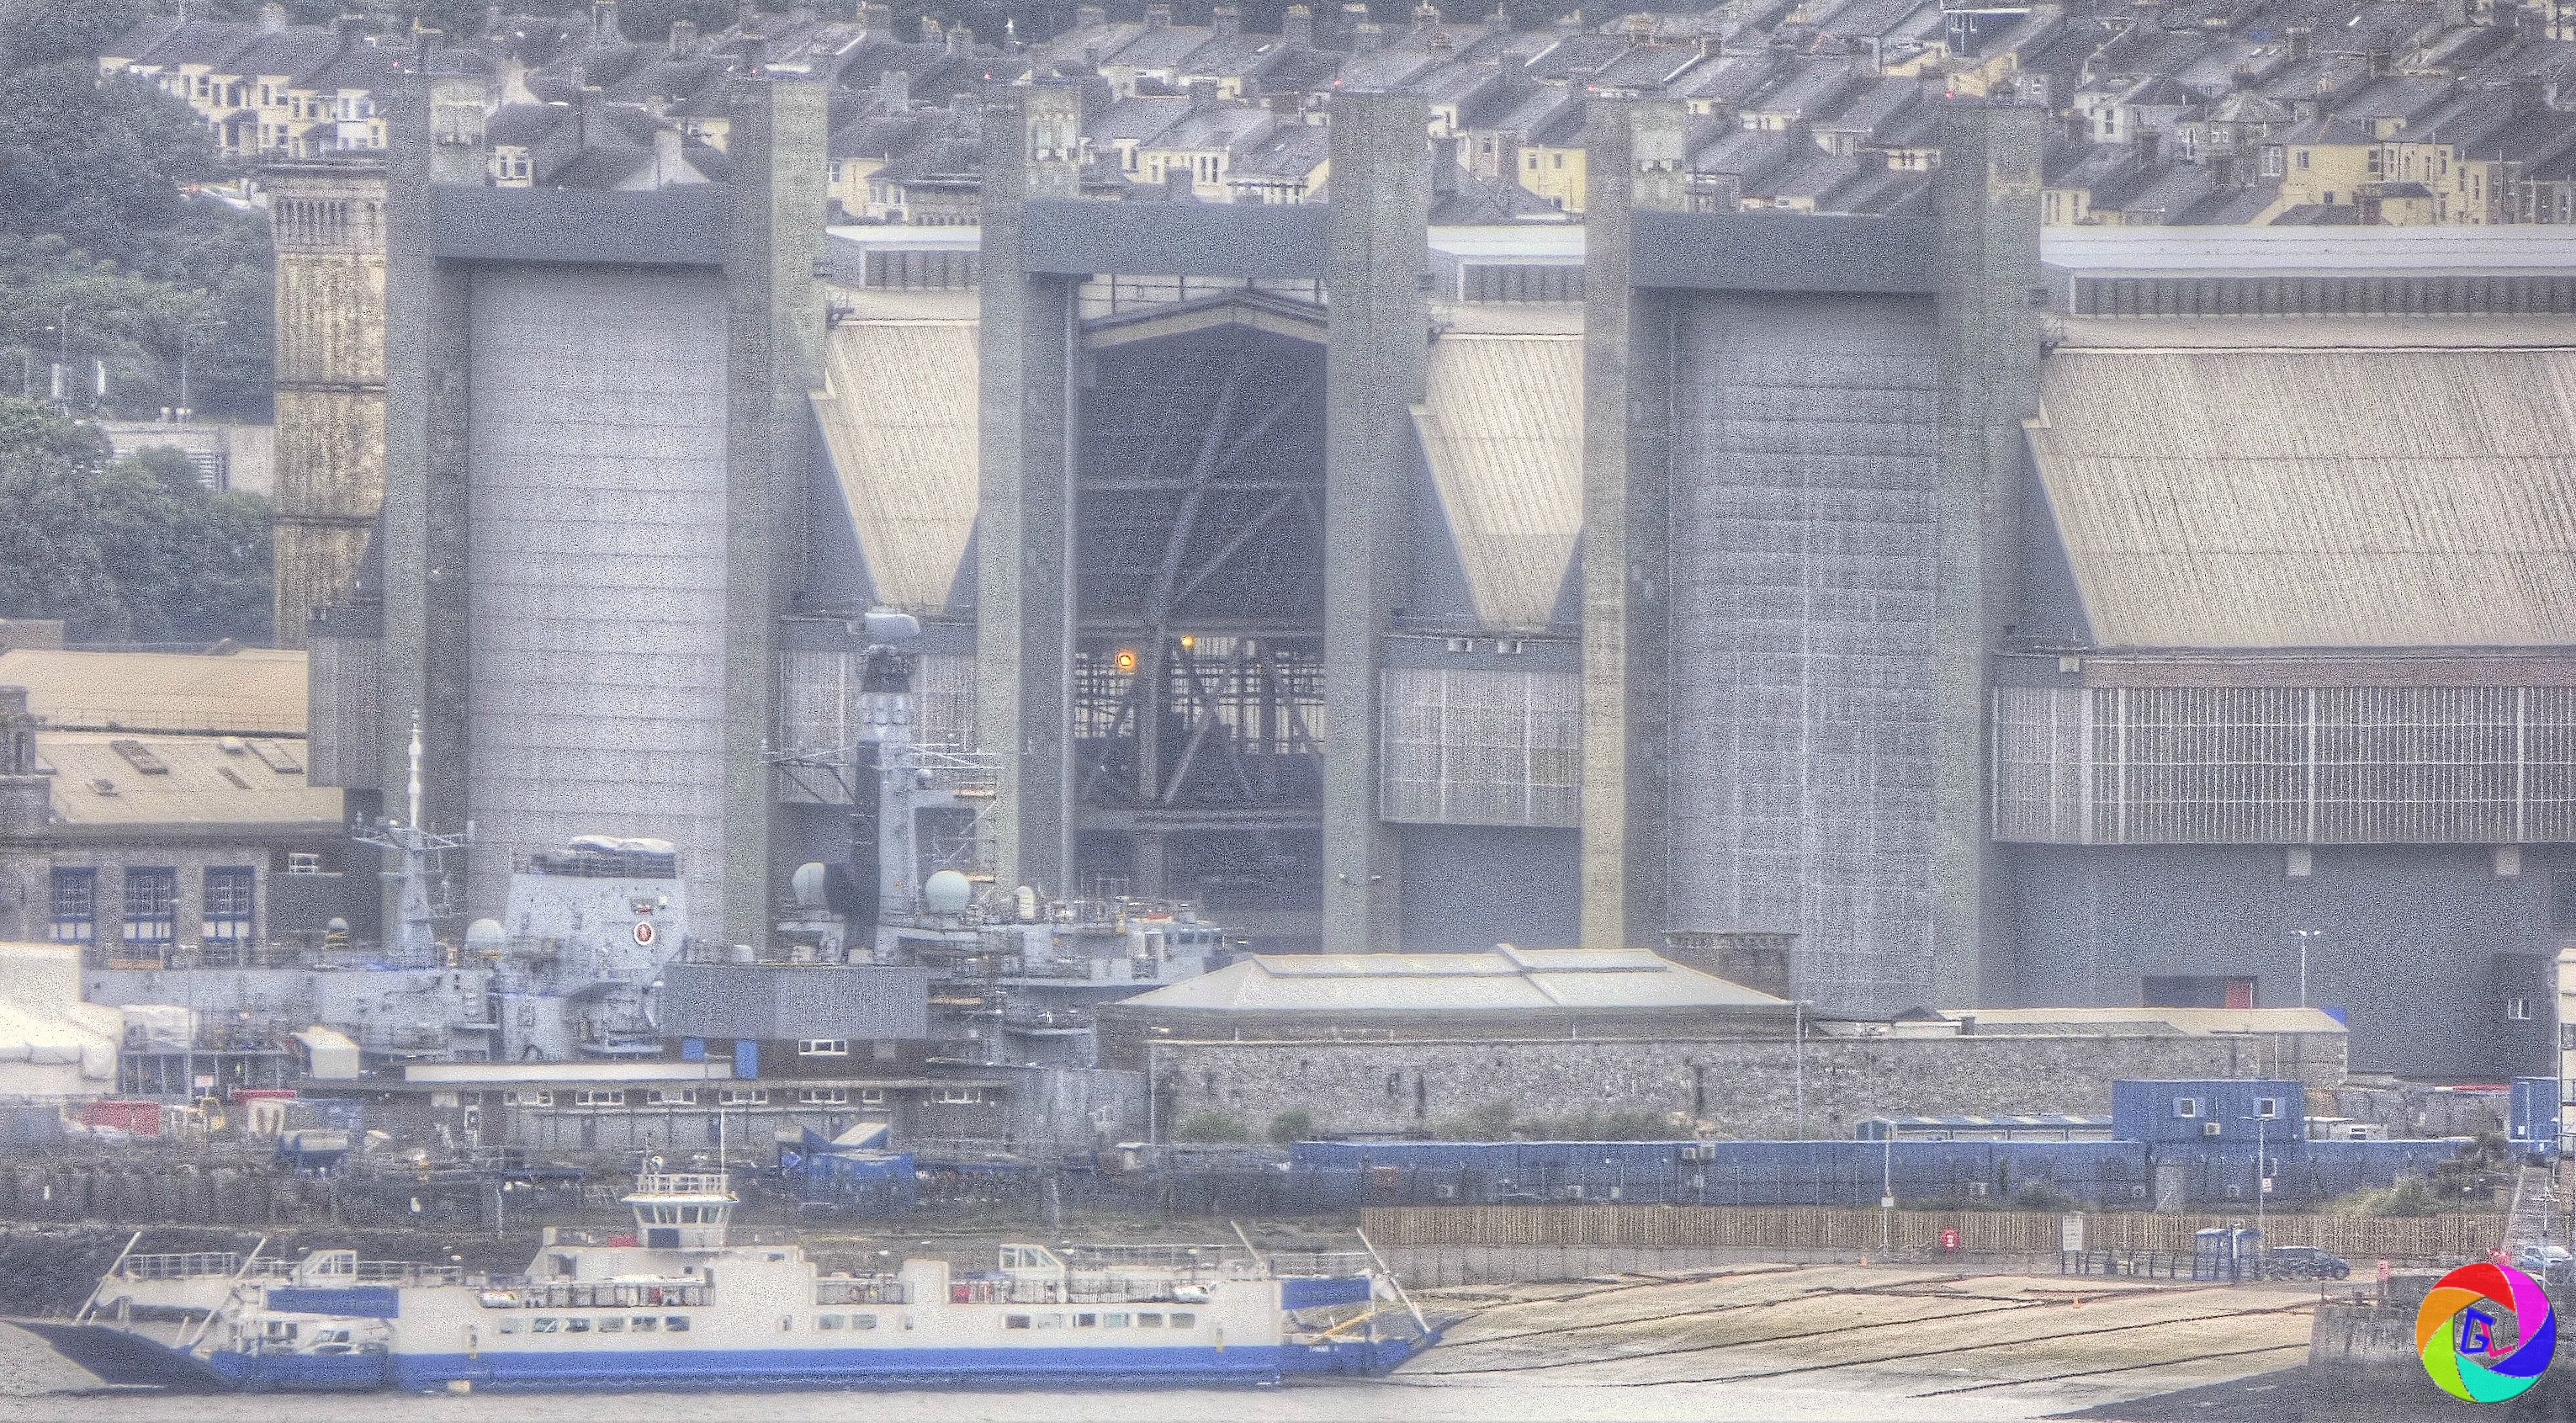 Large 'hanger' where frigates are repaired under cover. Torpoint ferry in foreground